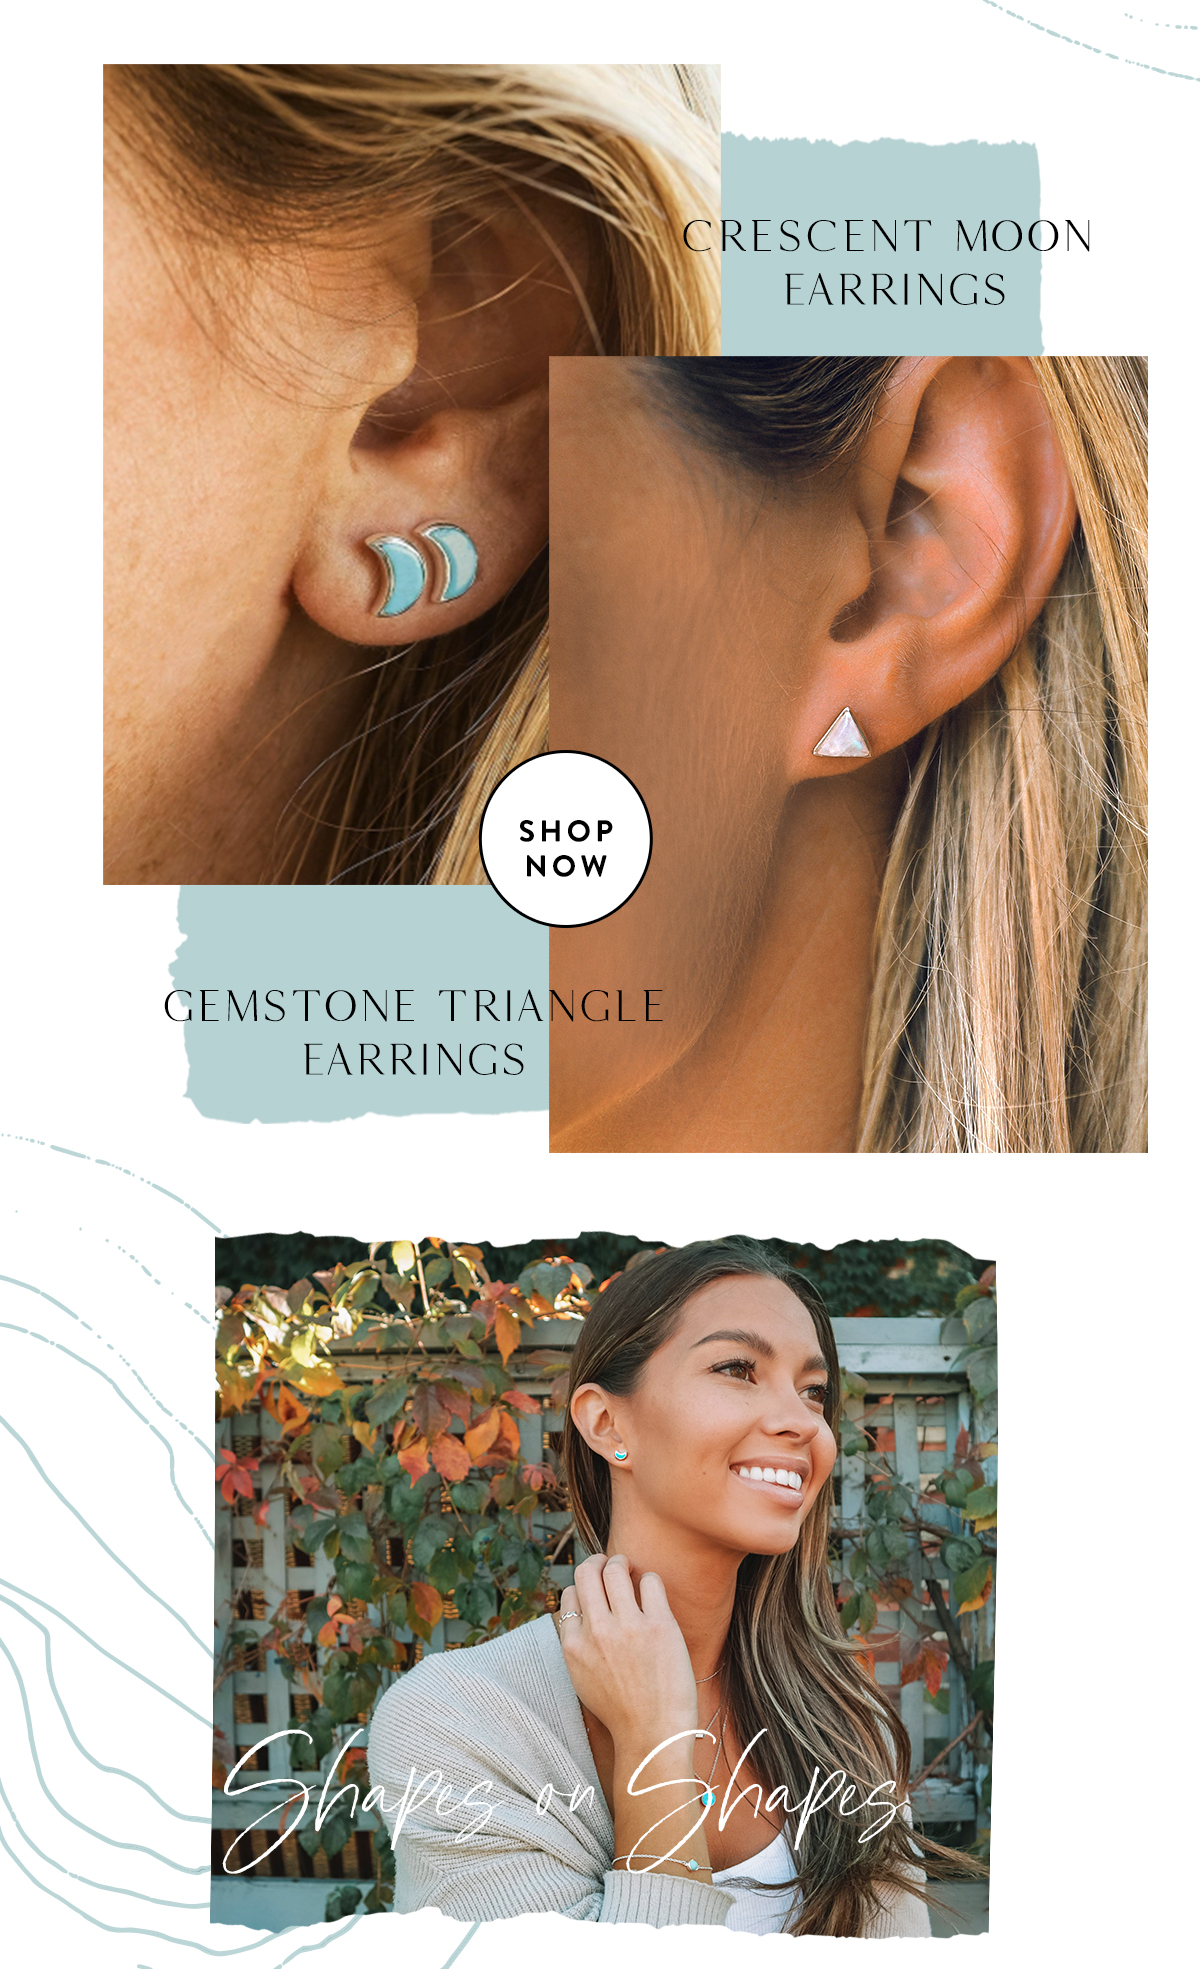 Crescent Moon & Gemstone Triangle Earrings | SHOP NOW >